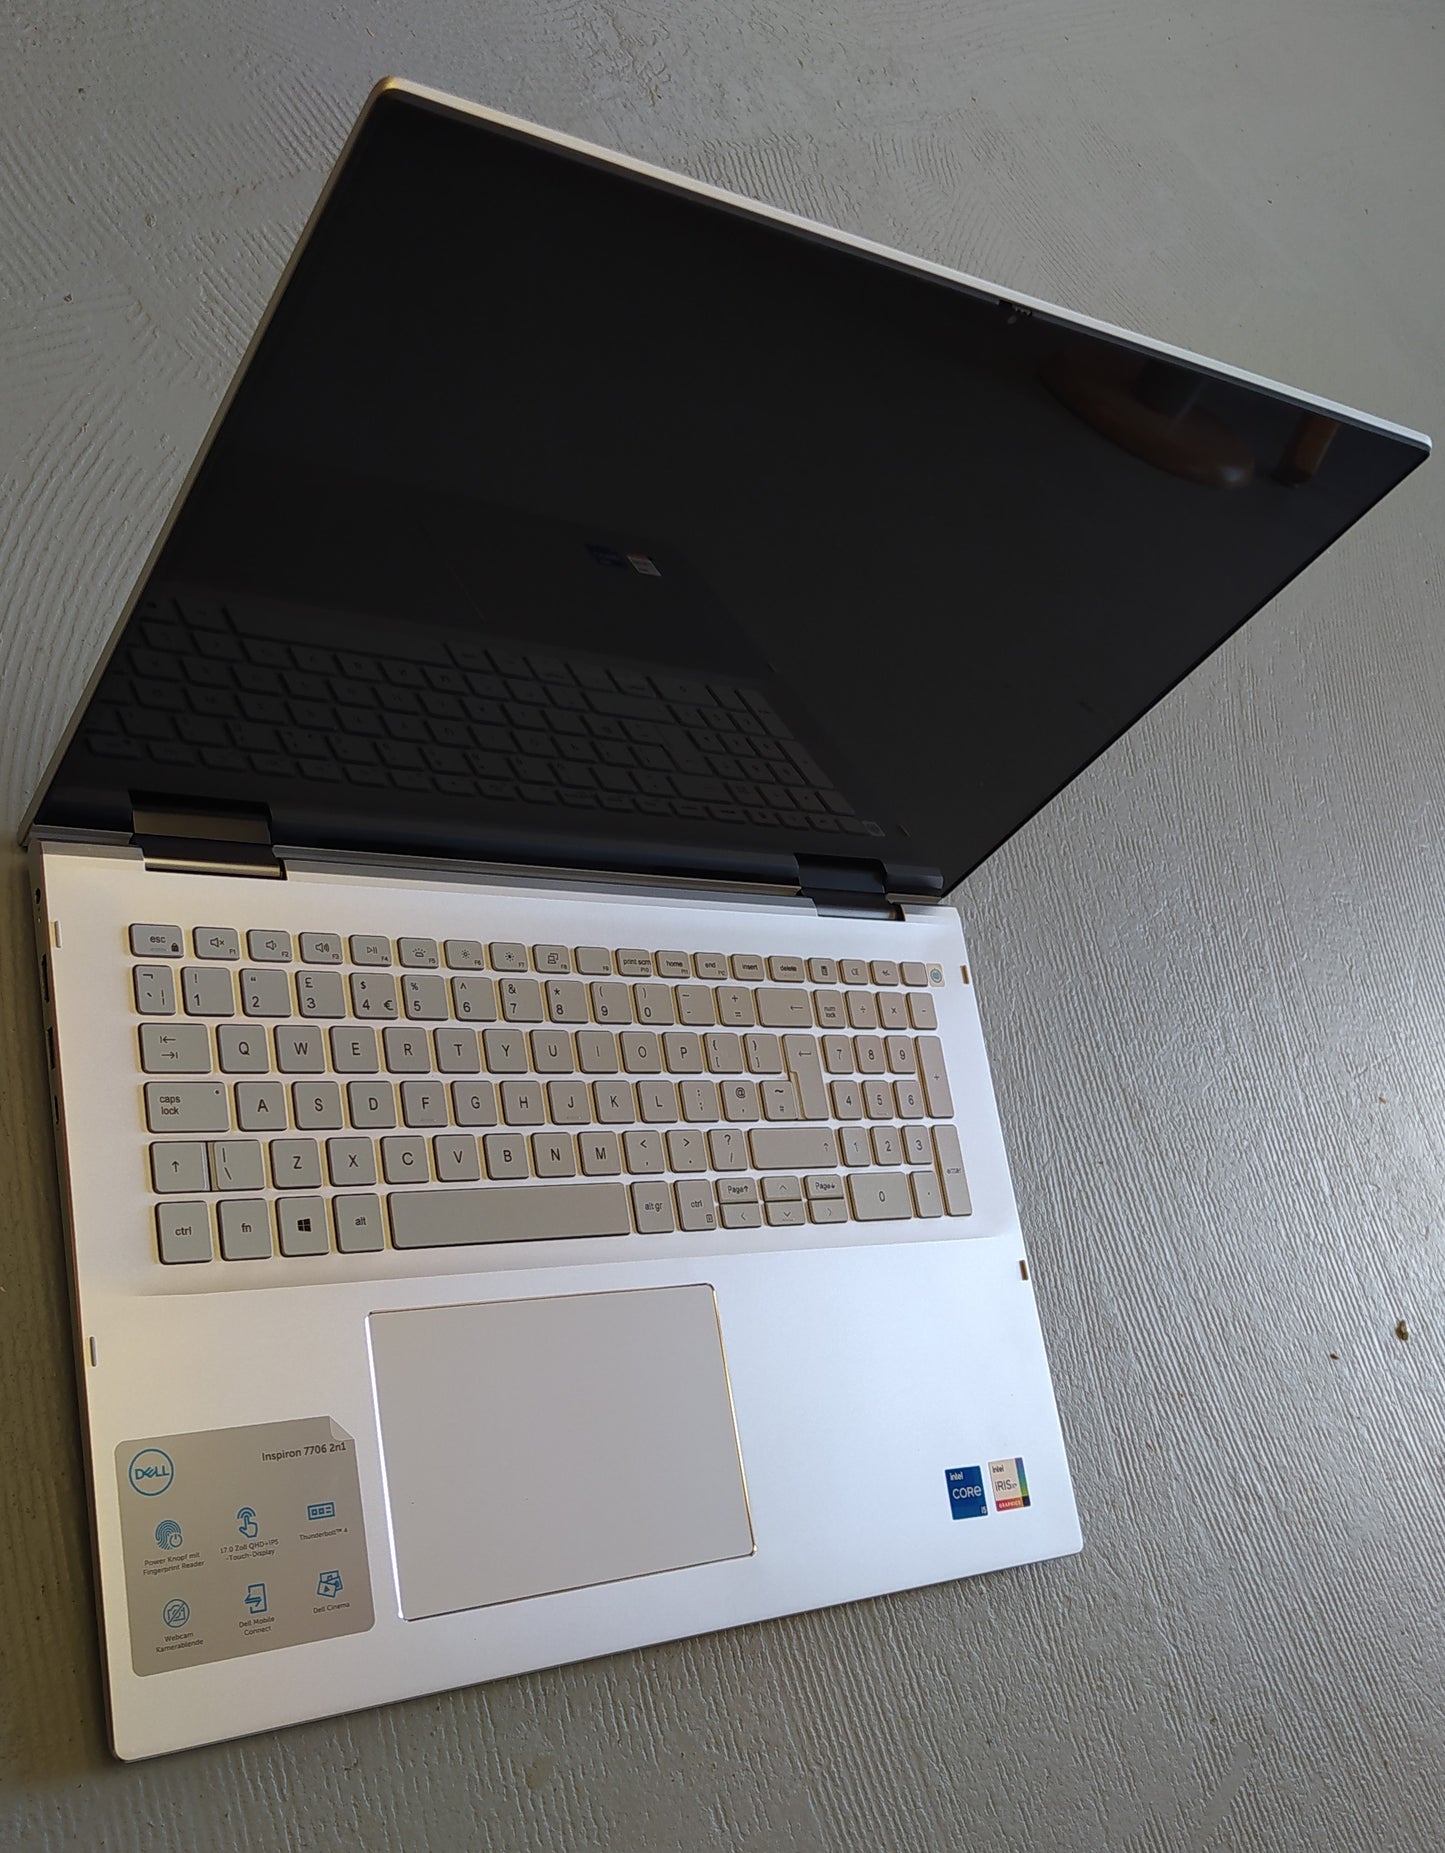 Keys of the Dell Inspiron 7706 - A platinum silver 2in1 laptop with 17 Inch screen and native 2560 x 1600 Resolution. Featuring Windows 11 and an 11th gen intel processor. Connect easily via USB-C (Thunderbolt), USB 3.2 and HDMI. Hosting a GeForce MX350 Graphics Card. 77061165G716GB512SSDMX350